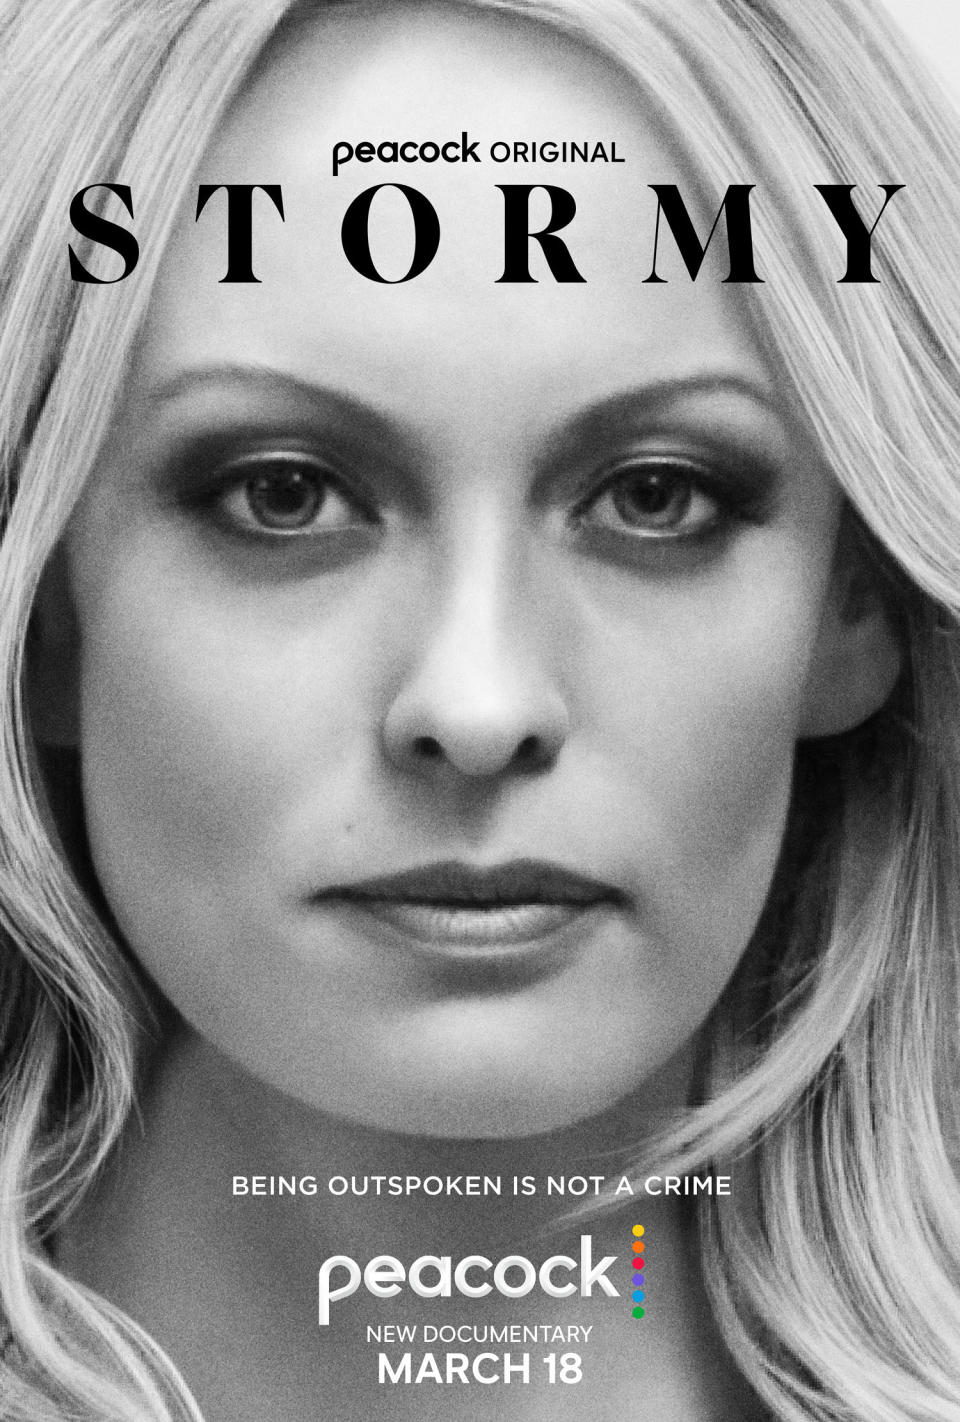 STORMY (Peacock)